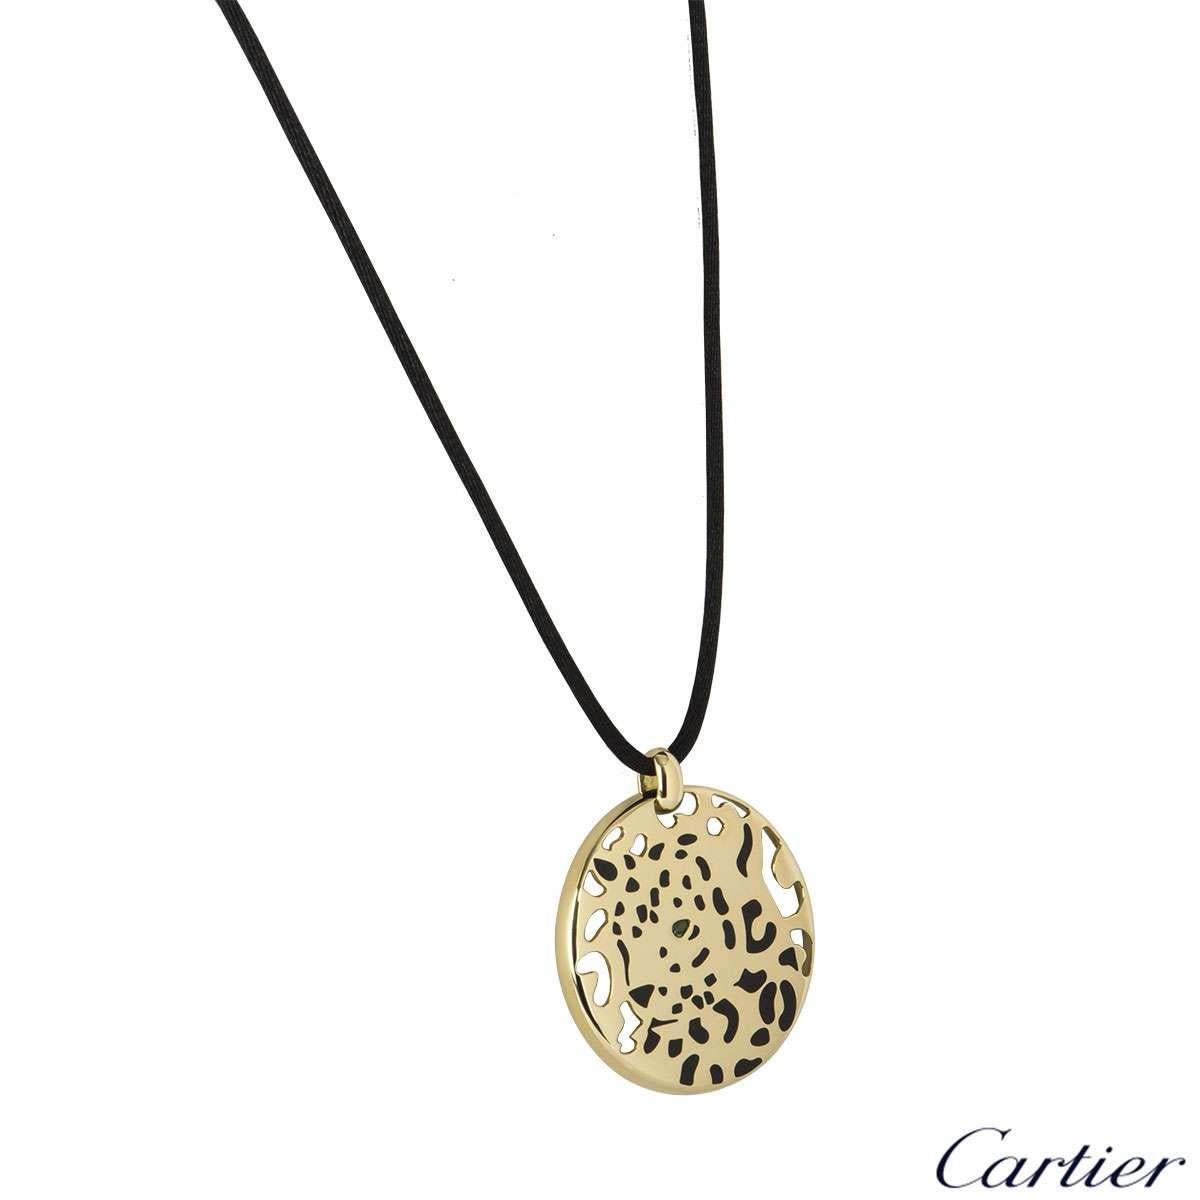 A stunning 18k yellow gold Cartier necklace from the Panthere collection. The necklace features a circular motif with a panther in the centre shaped from black lacquer, complete with a single tsavorite garnet as the eye. The circular motif measures